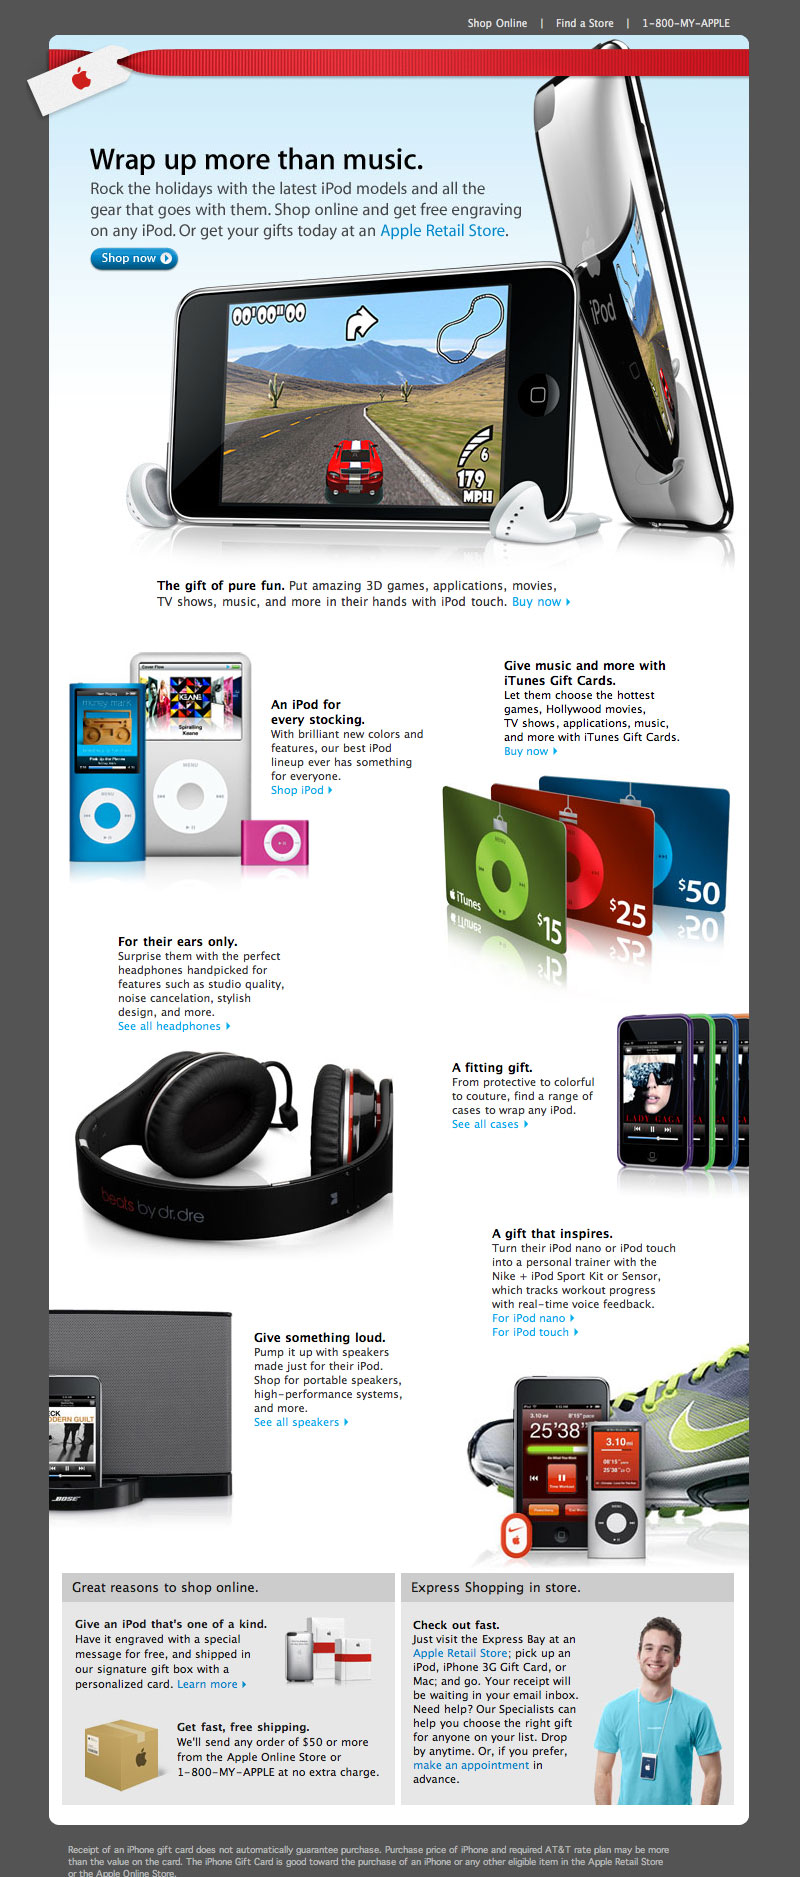 Apple iPod Holiday Email